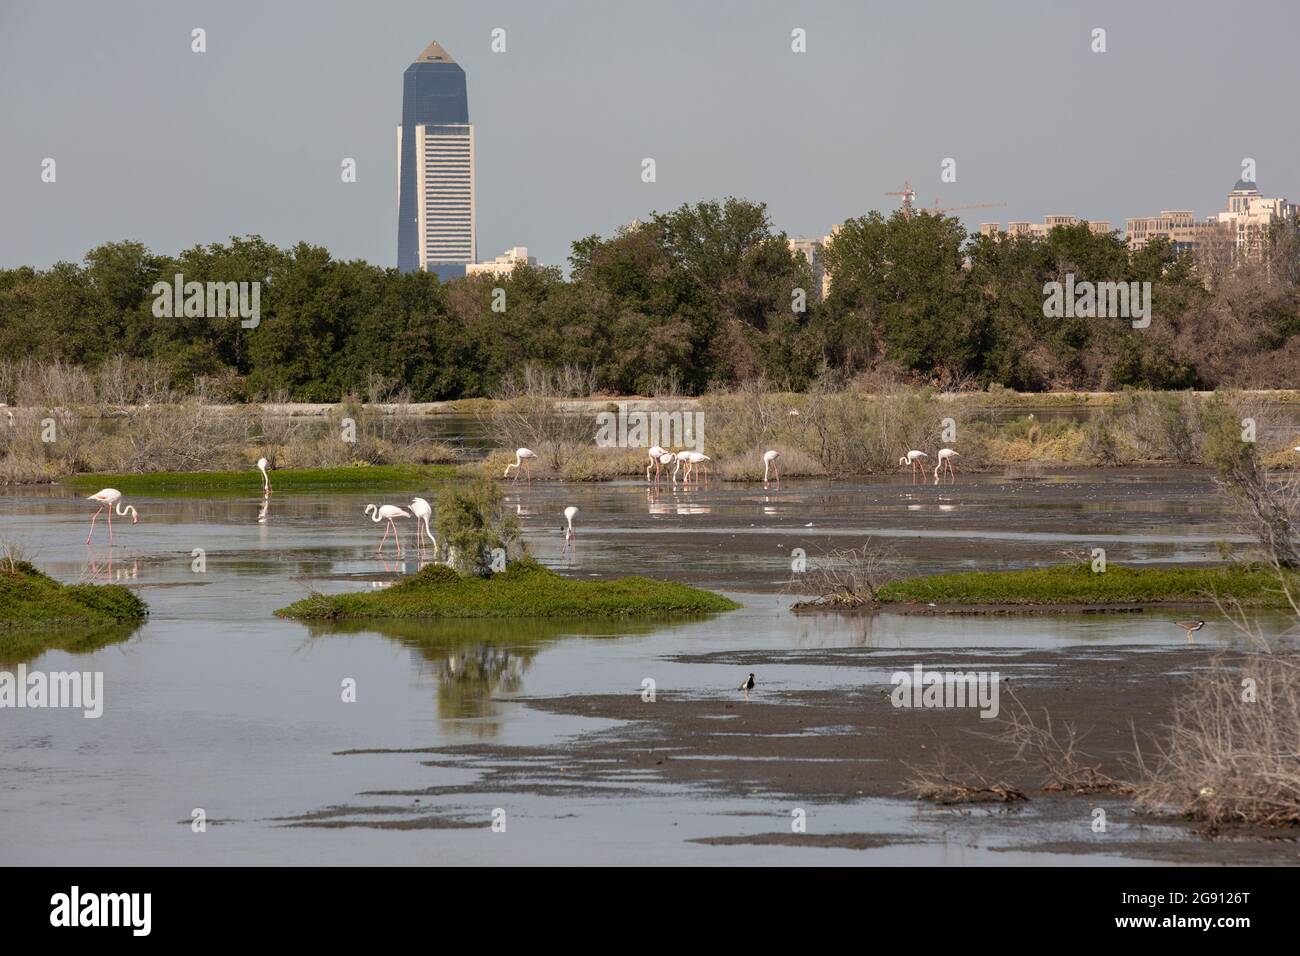 The new Sofitel Dubai known as 'The Obelisk' by Duccio Grassi Architects rises high into the sky above the flamingos at the wetland nature reserve Ras Stock Photo